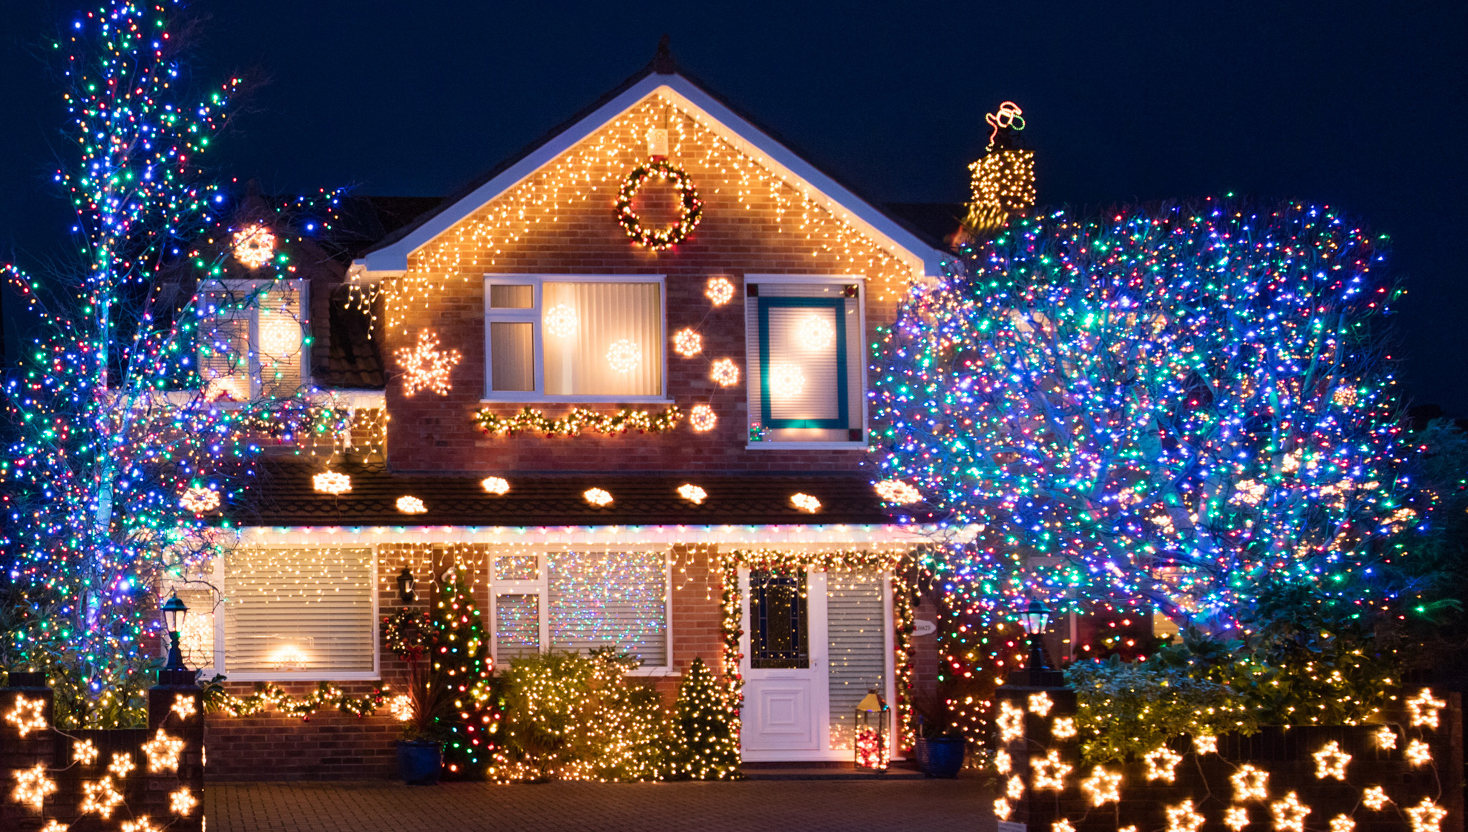 🎄 Decorate Your House for Christmas and We’ll Give You a Hot Celeb to Kiss Under the Mistletoe Christmas house lightup